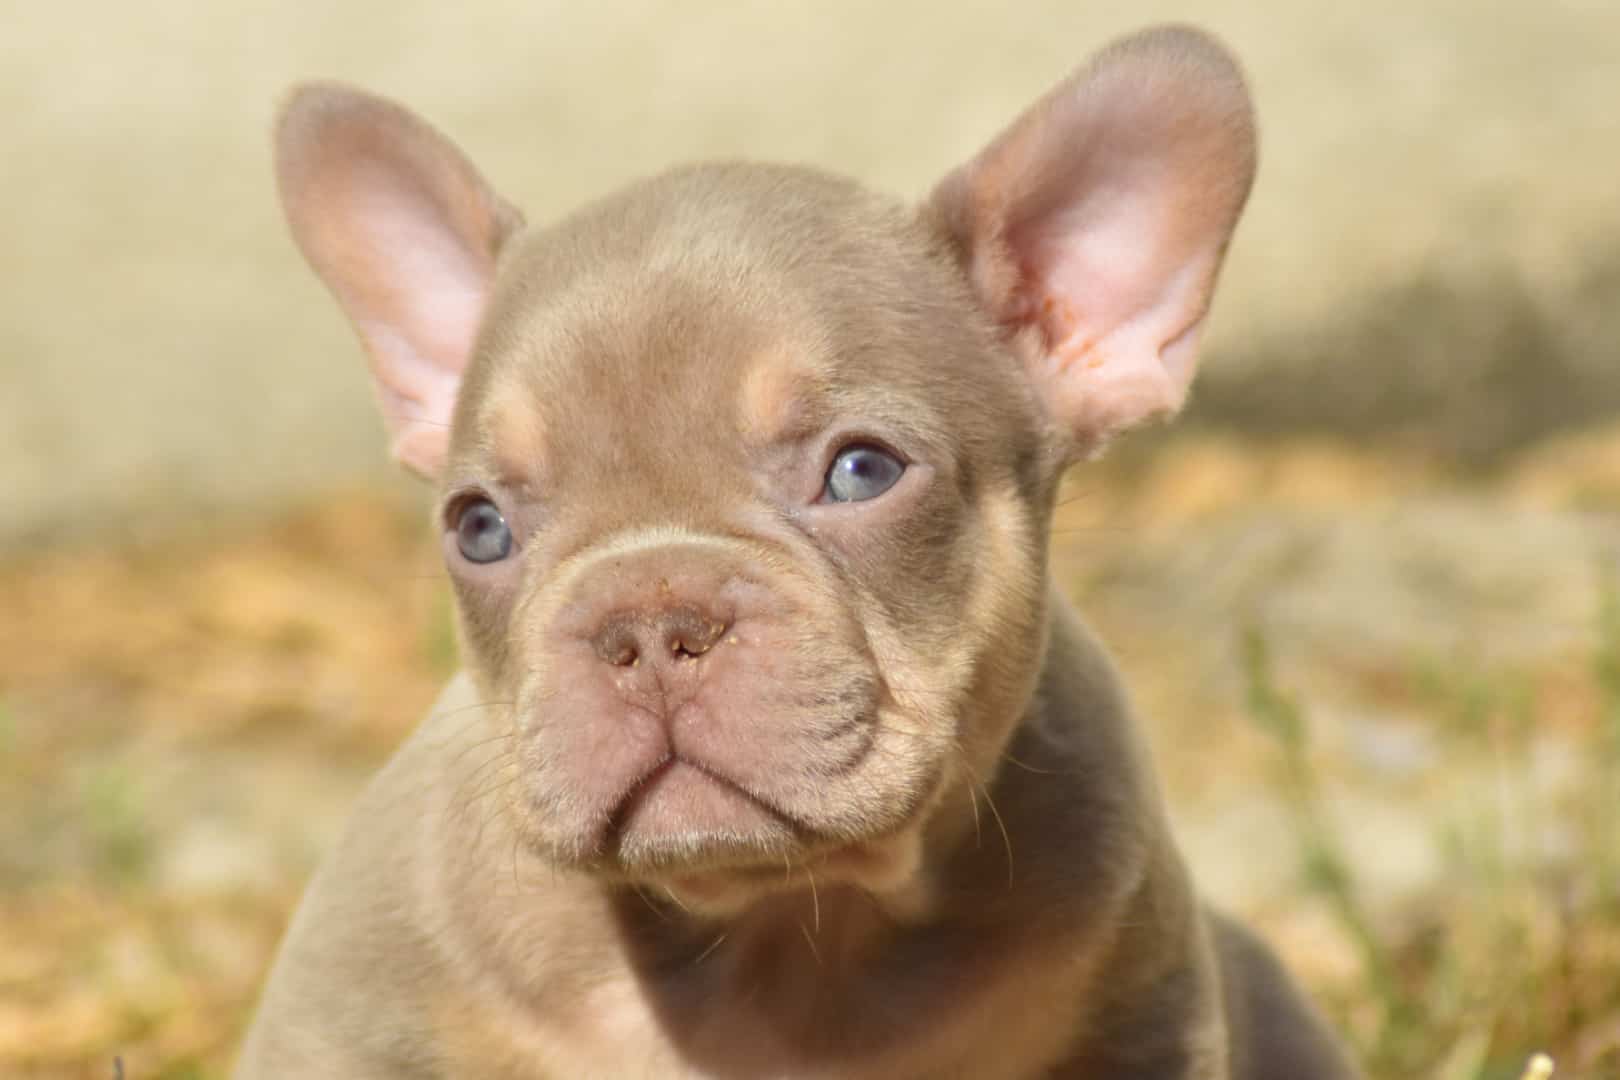 Chiot mâle bouledogue français exotique isabella tan new shade french bulldog exotic frenchie